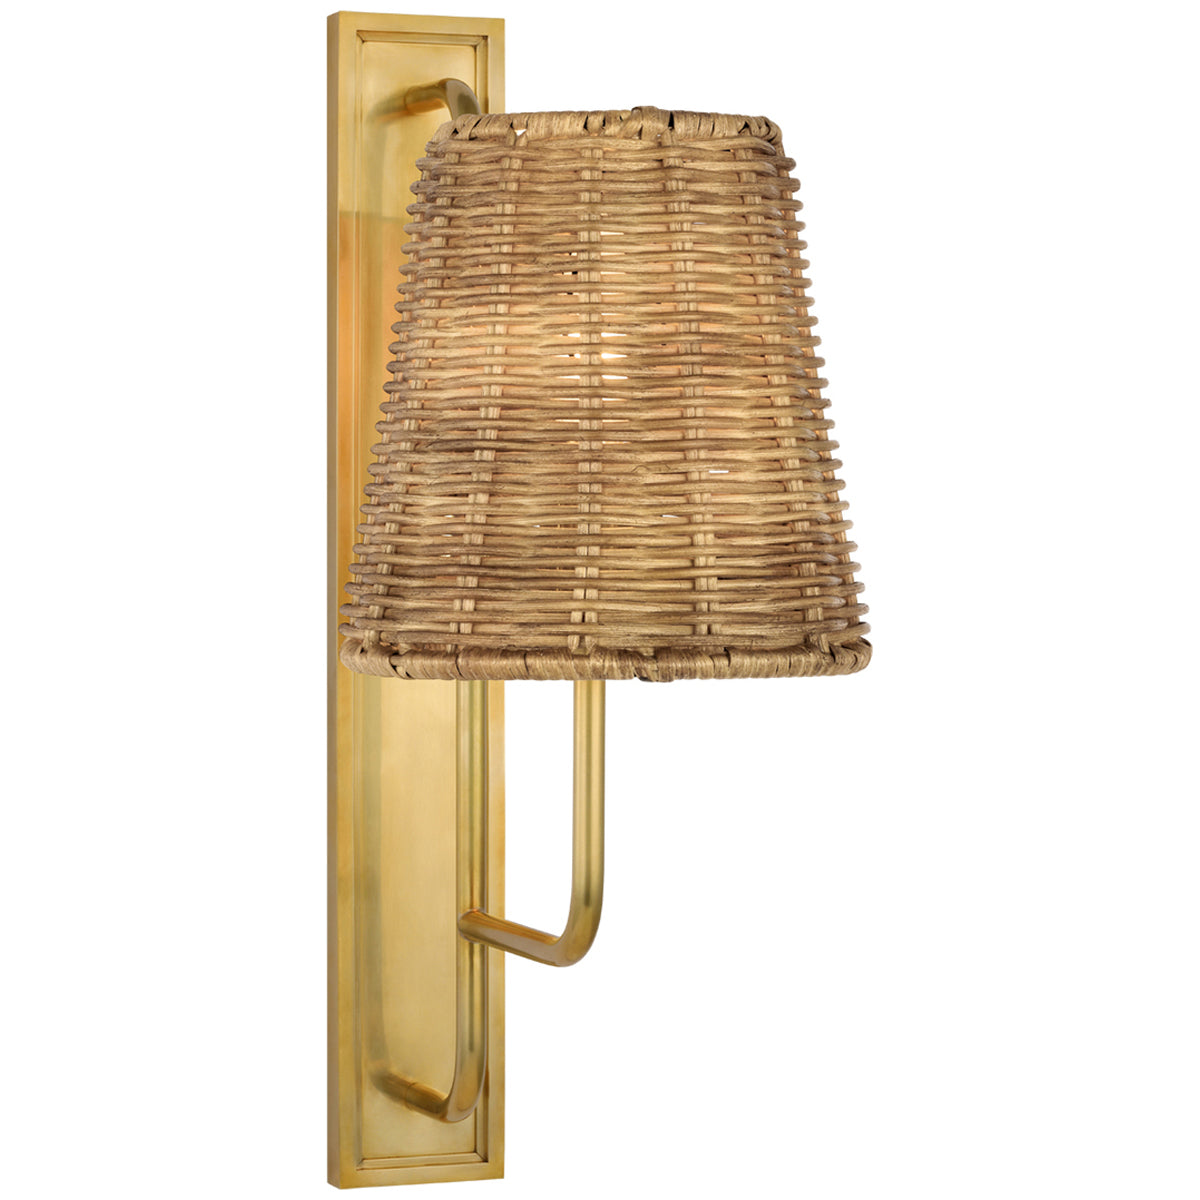 Visual Comfort Rui Tall Sconce with Natural Wicker Shade